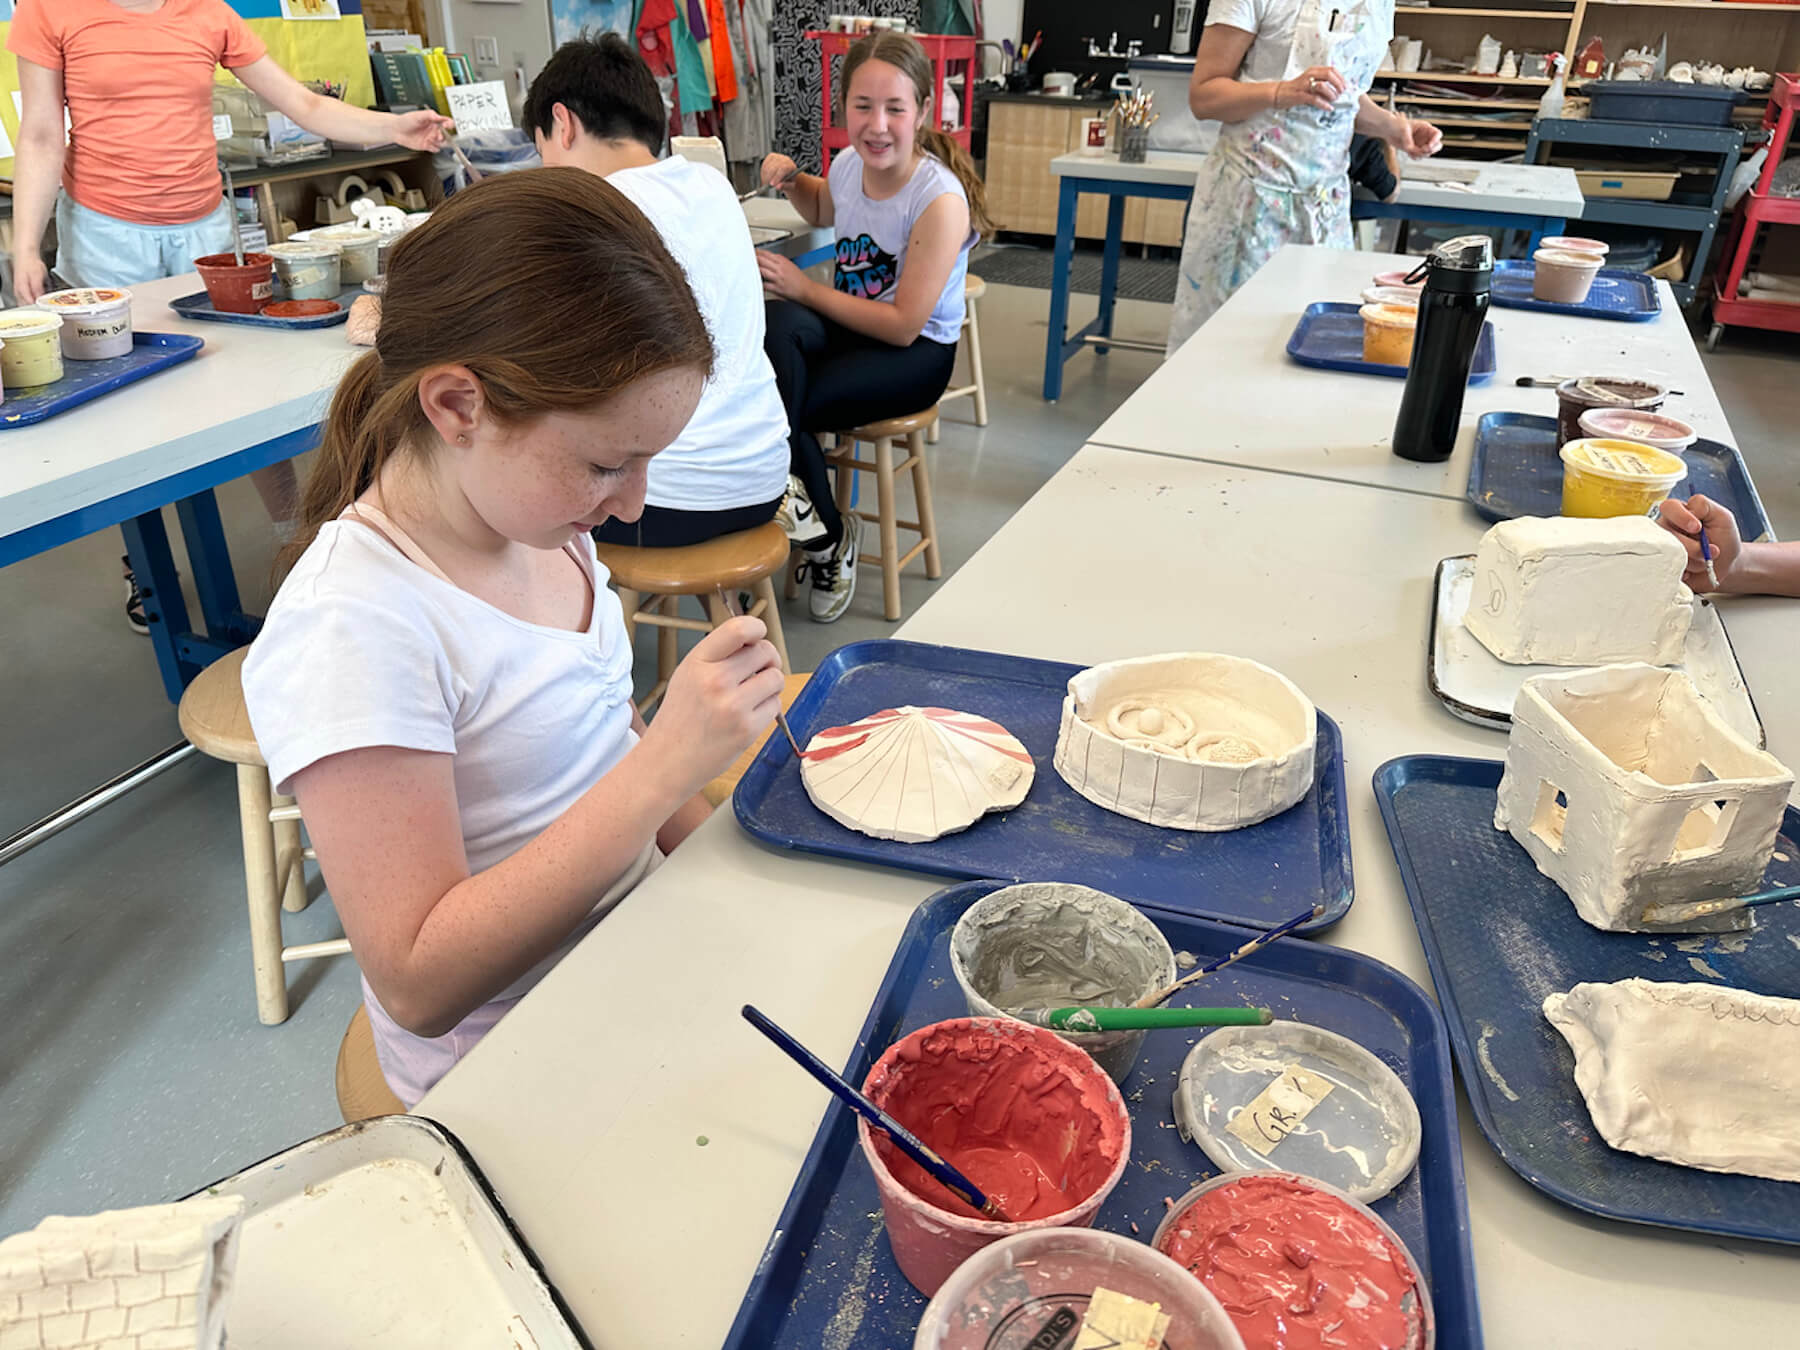 Ethical Culture 5th Grader paints her circus themed ceramics project.